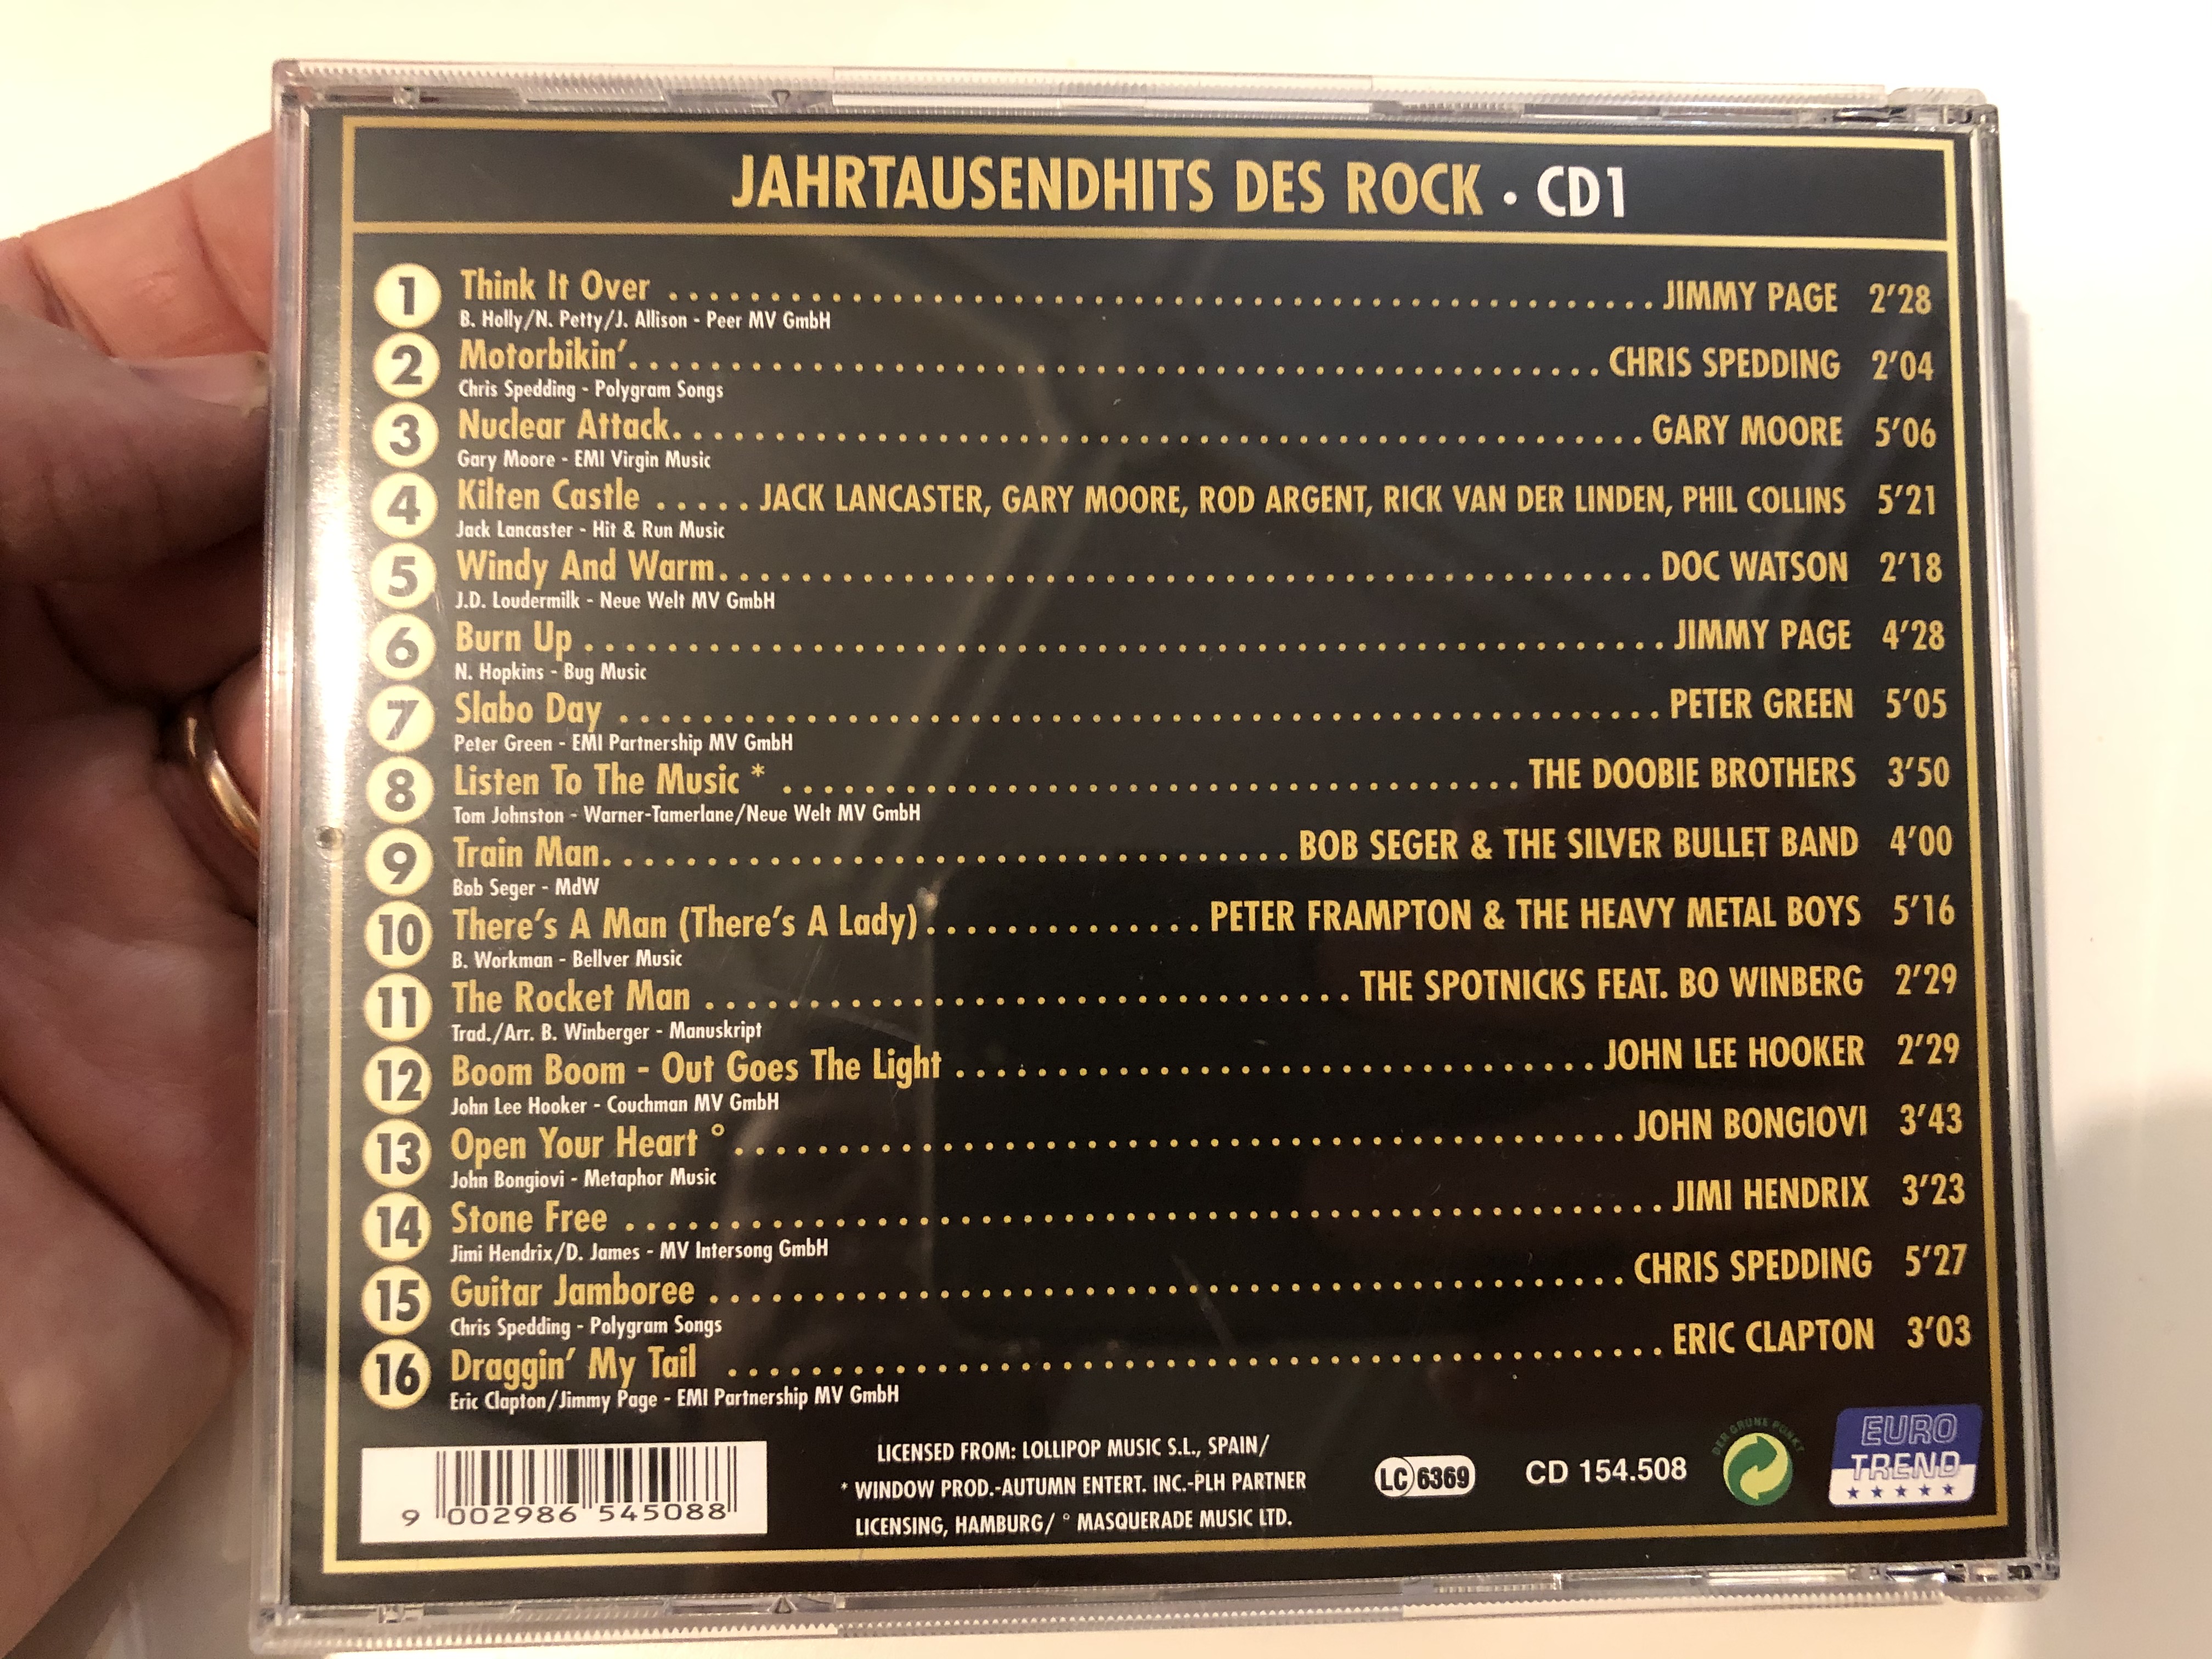 jahrtausendhits-des-rock-1-the-rocket-man-stone-free-nuclear-attack-listen-to-the-music-boom-boom-out-goes-the-light-eurotrend-audio-cd-cd-154-2-.jpg